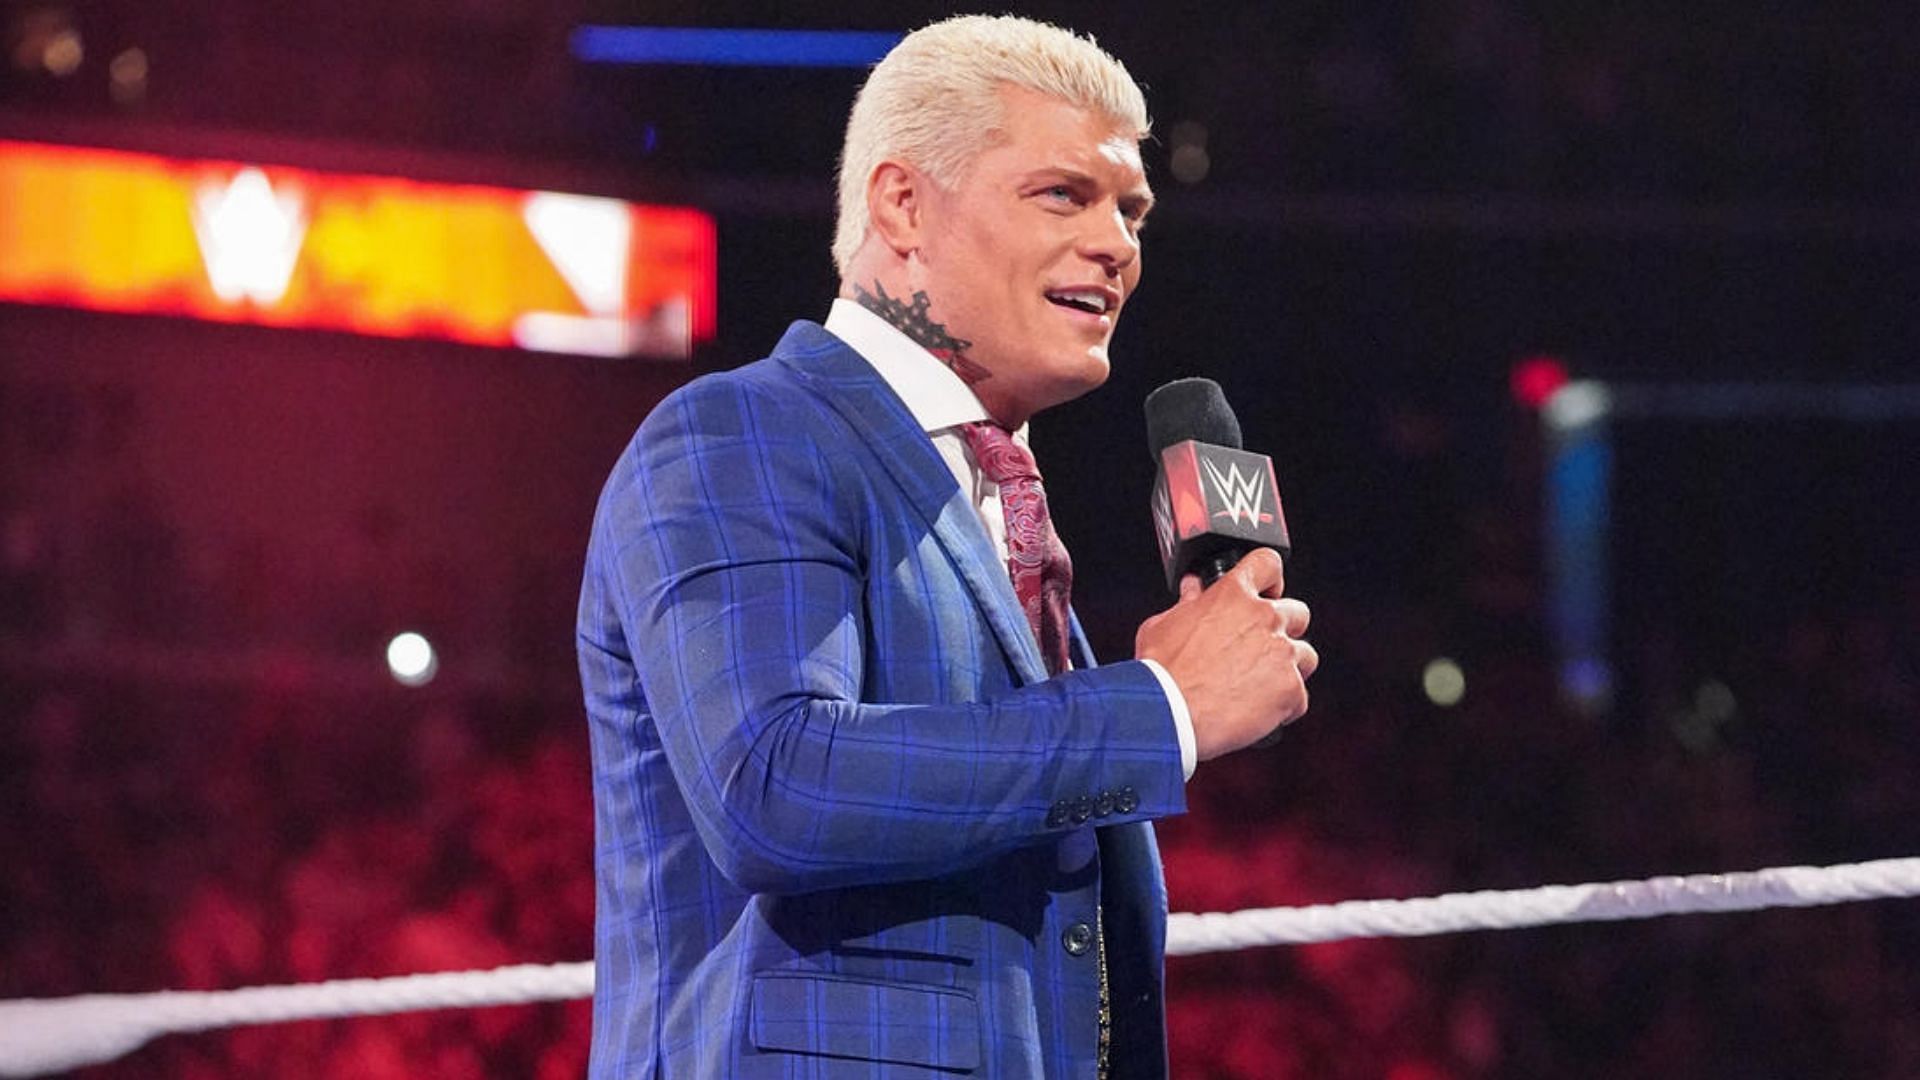 Cody Rhodes is the current top babyface on RAW